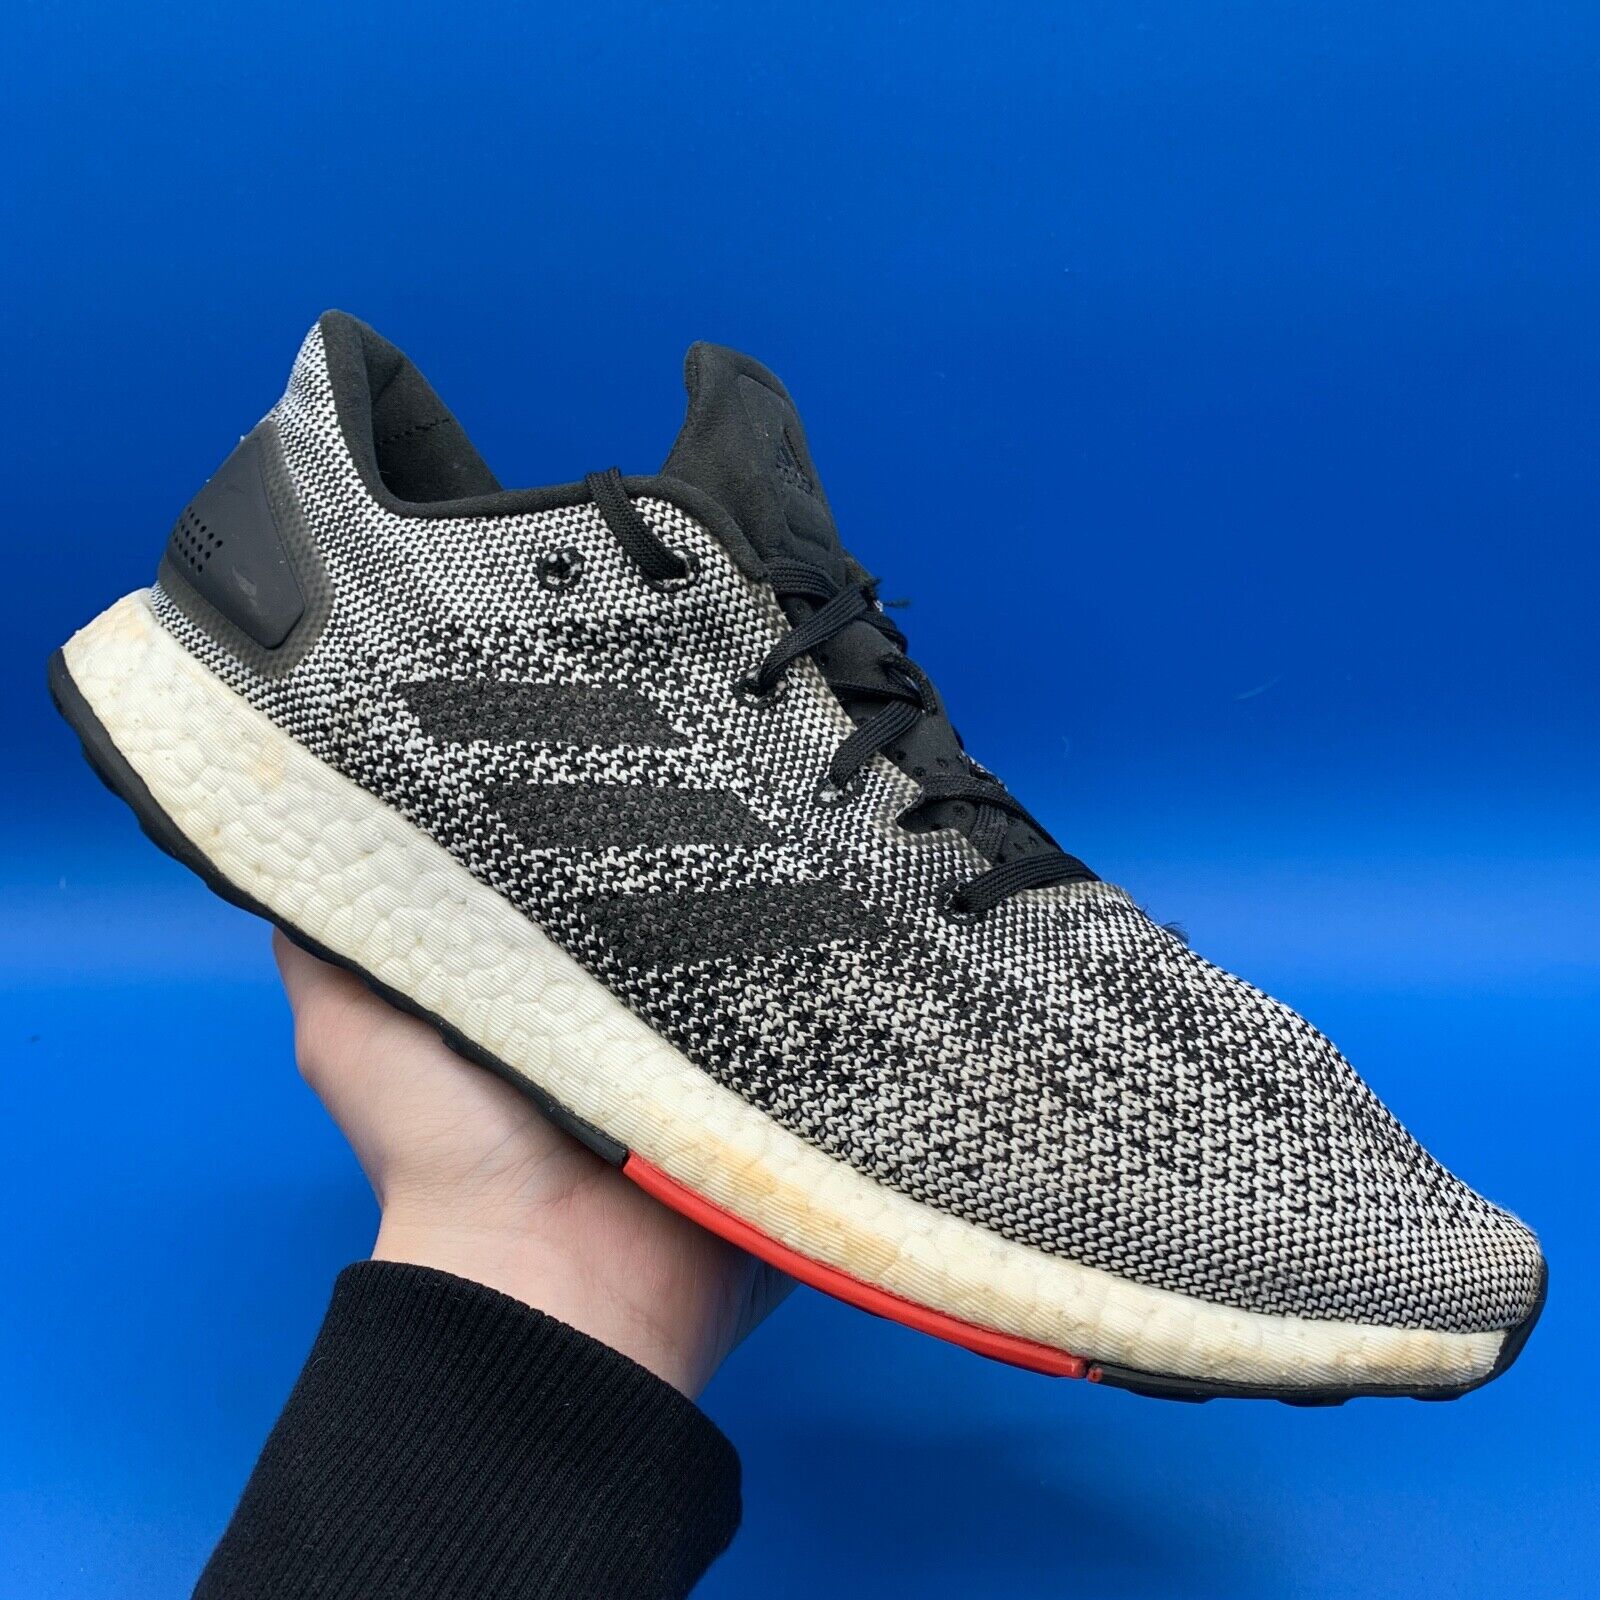 transmission stay up slack Adidas Pureboost DPR Mens Shoes Sneakers Size 10 Black White Running s80993  190308457924 | eBay